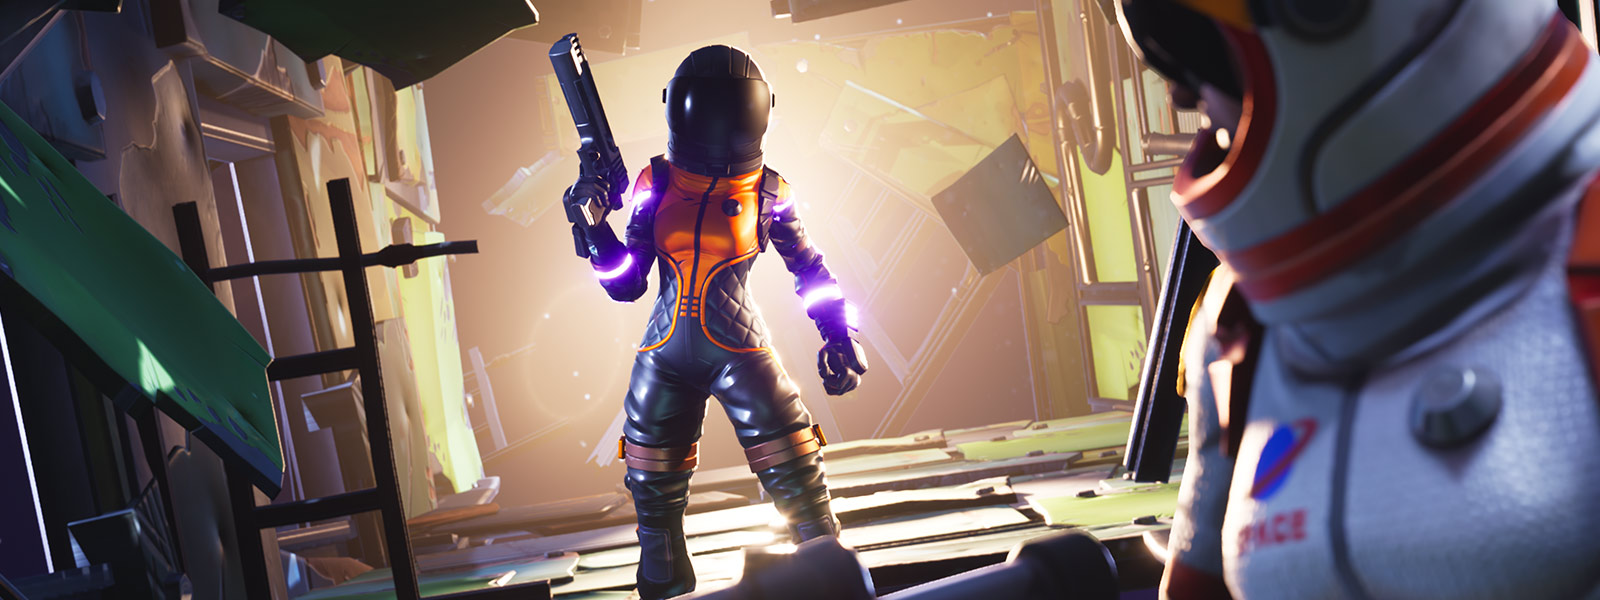 a female character holding a gun in a spacesuit stands in a space station that is - fortnite skins holding xbox controllers